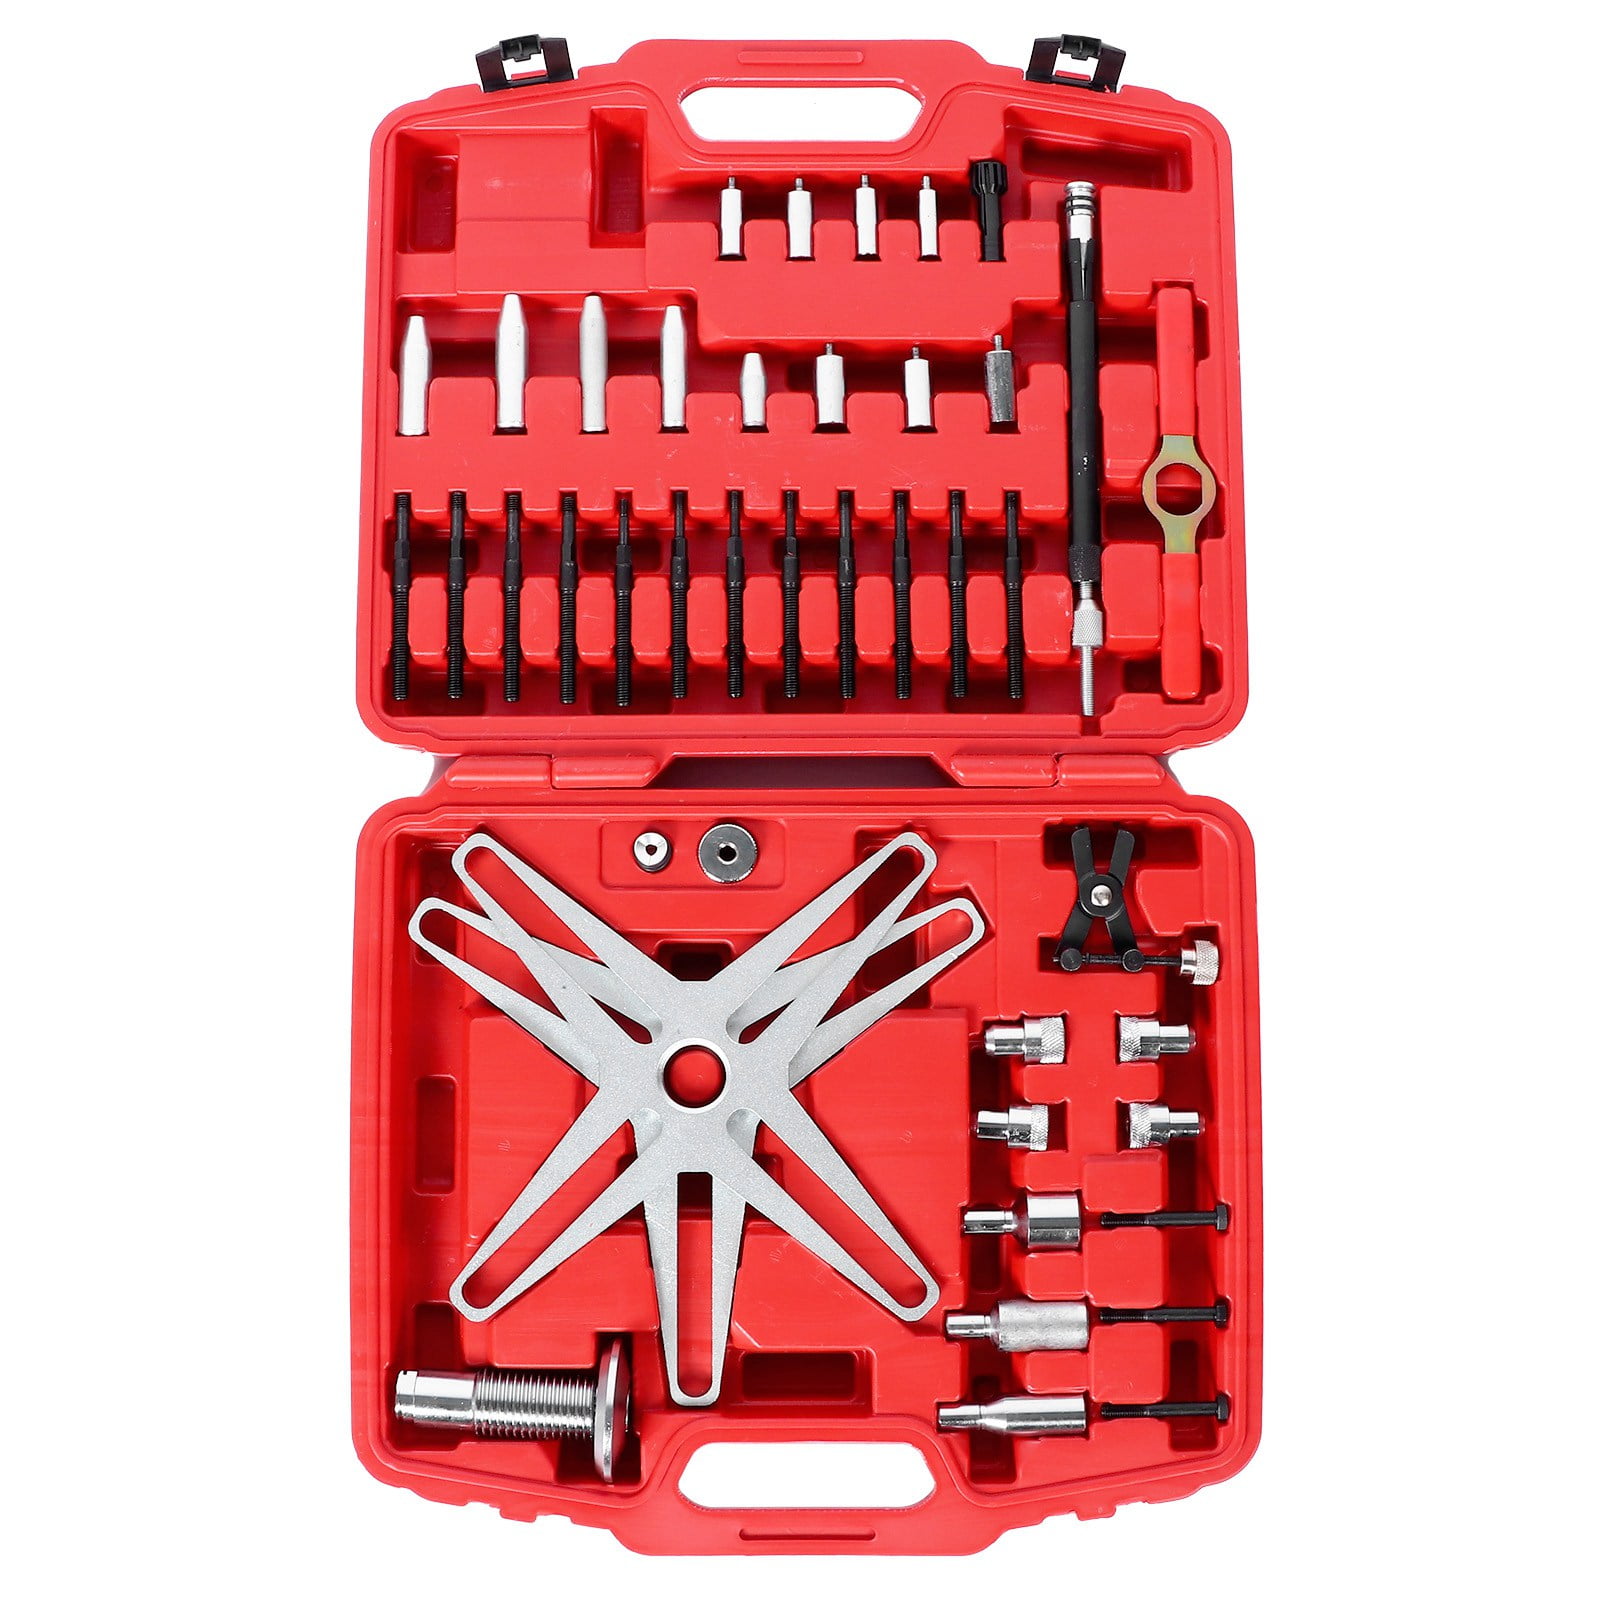 Storage Box 43Pcs Self-Adjusting Clutch Alignment Setting Tool Universal S‑SAC34UPG Self Adjusting Clutch Tool Fit for Connectors with 3‑hole and 4‑hole pitch Steel Clutch Alignment Setting Tool